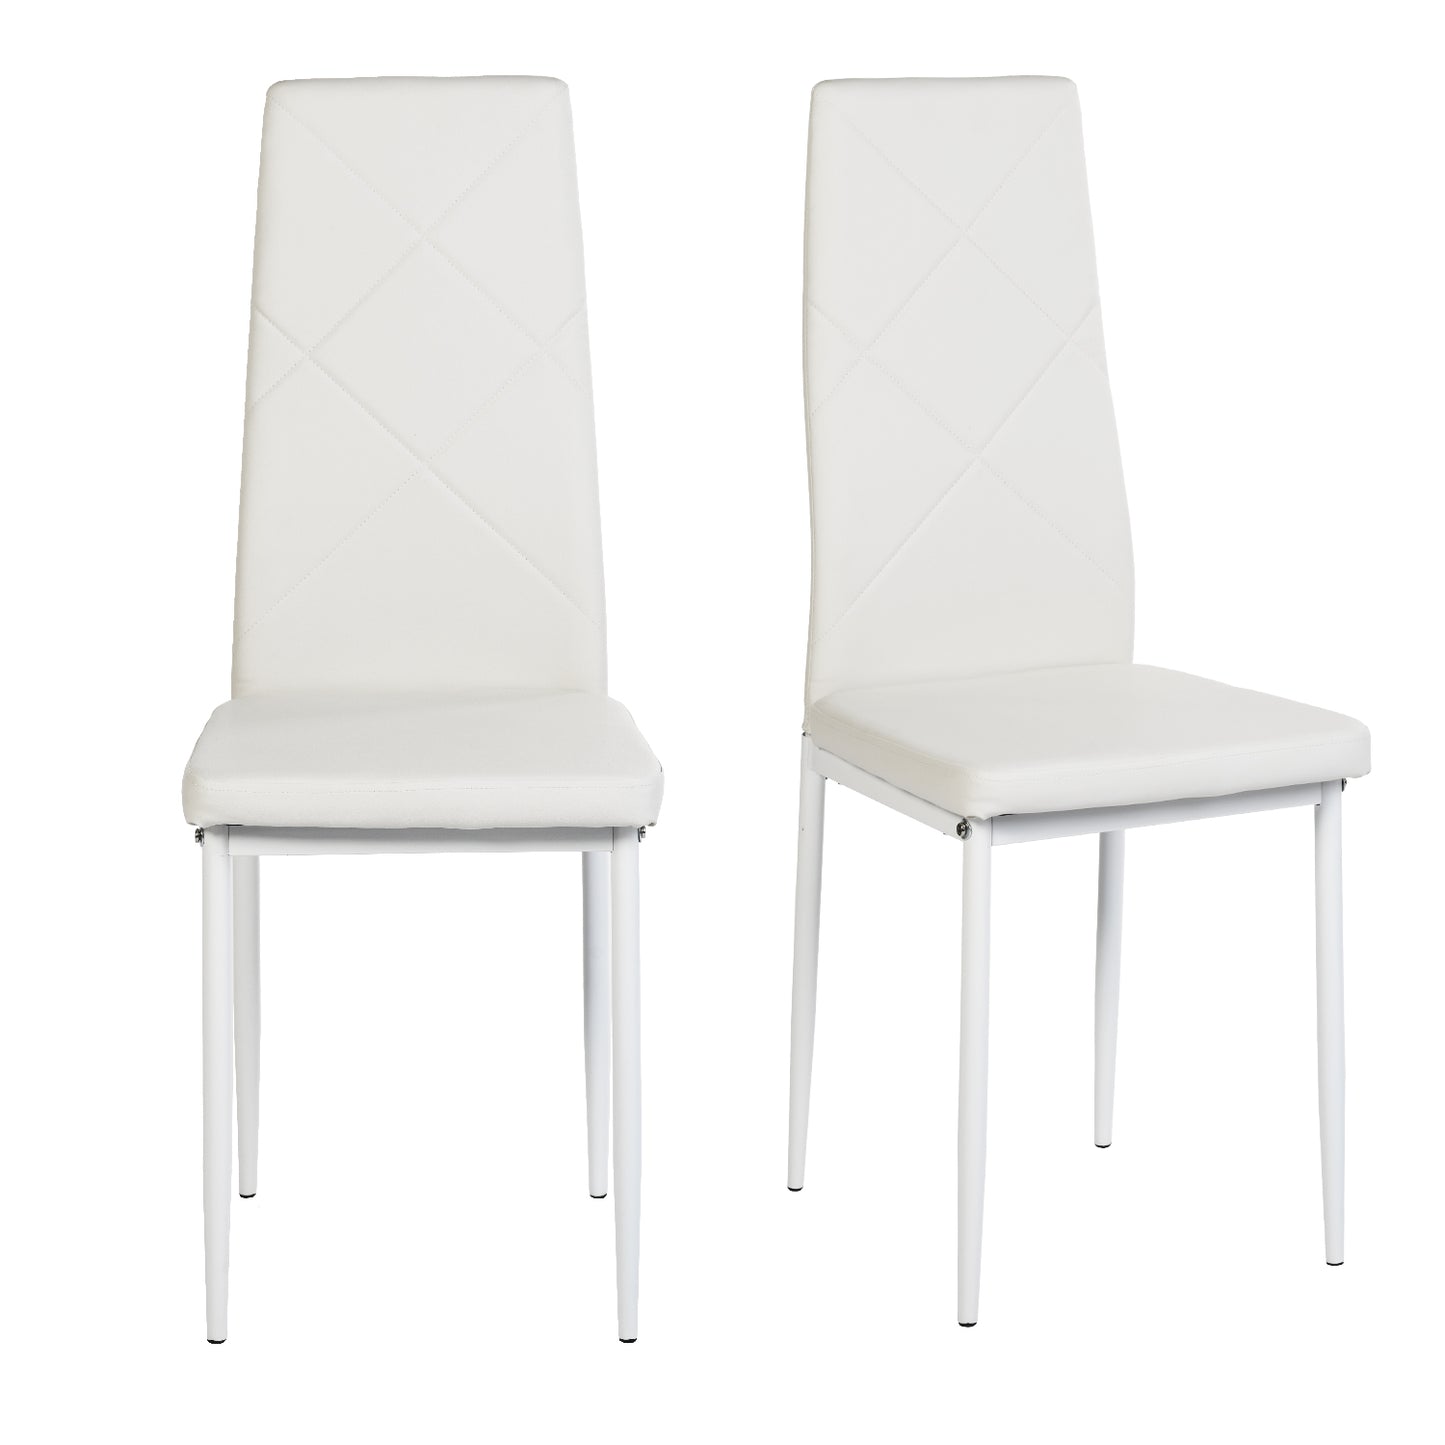 ANN-DIAMOND Upholstered Side Chairs (Set of 2)